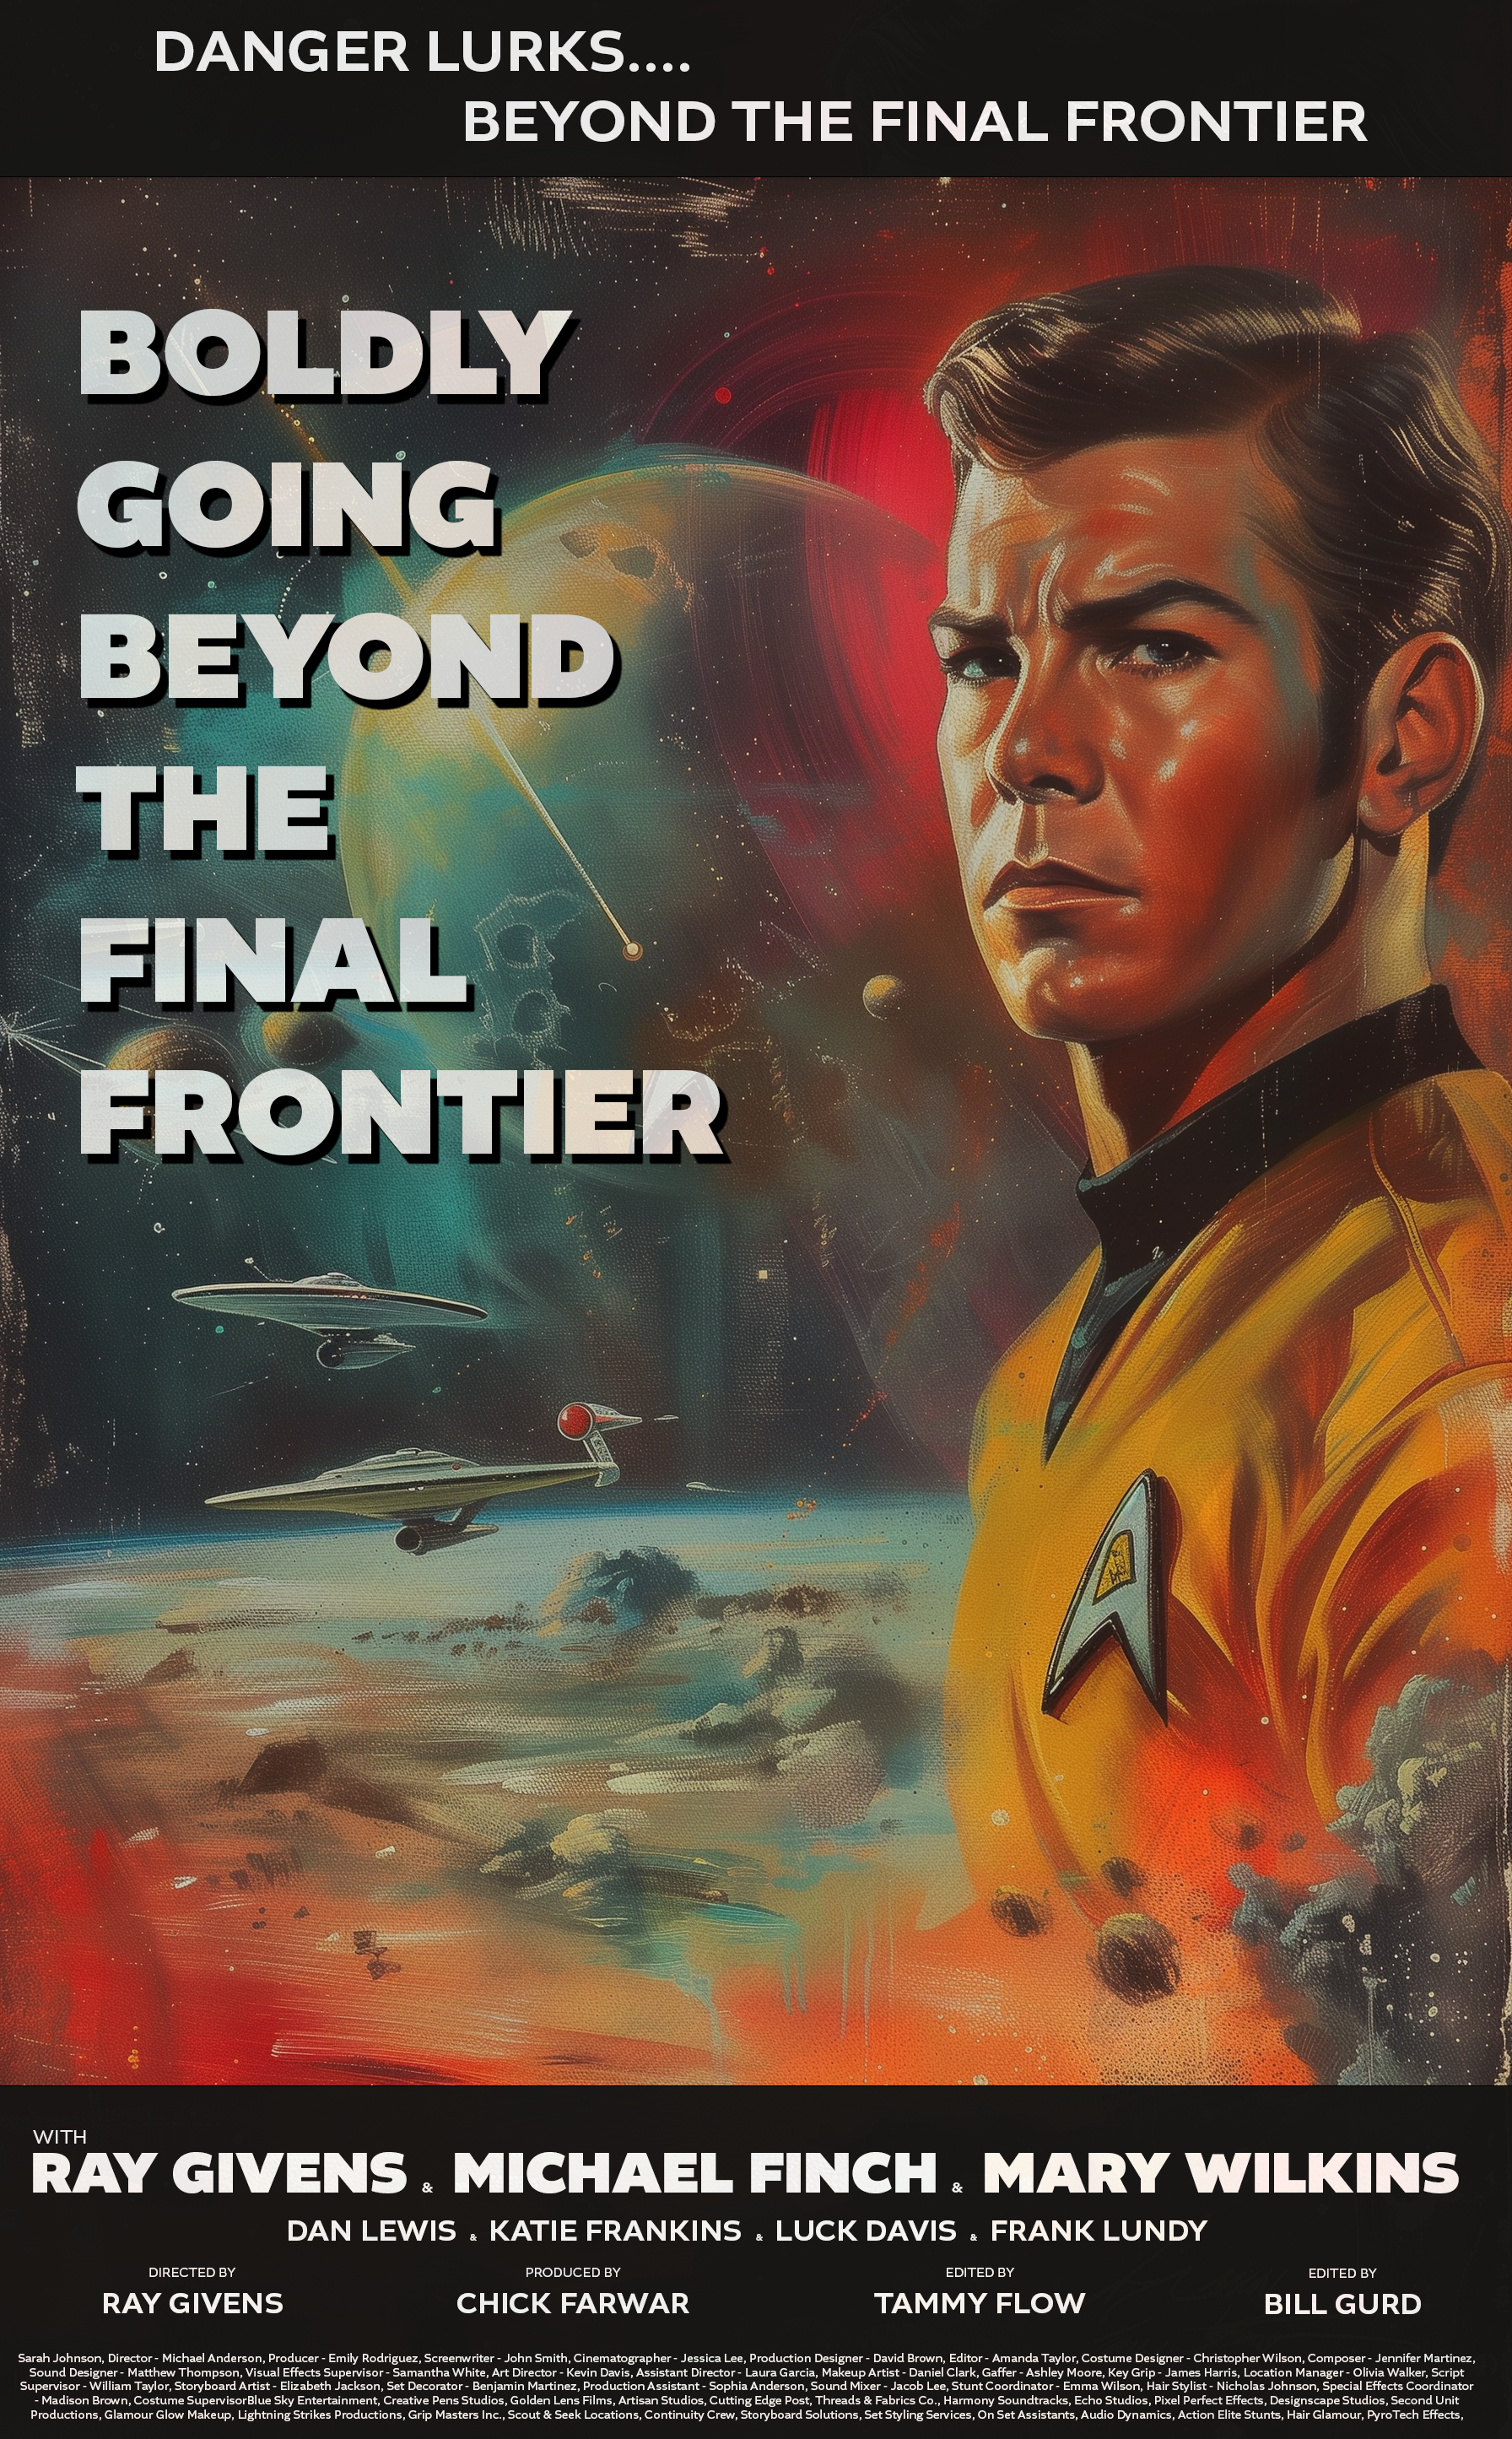 Name:  Beyond the Final Frontier.png
Views: 206
Size:  8.19 MB